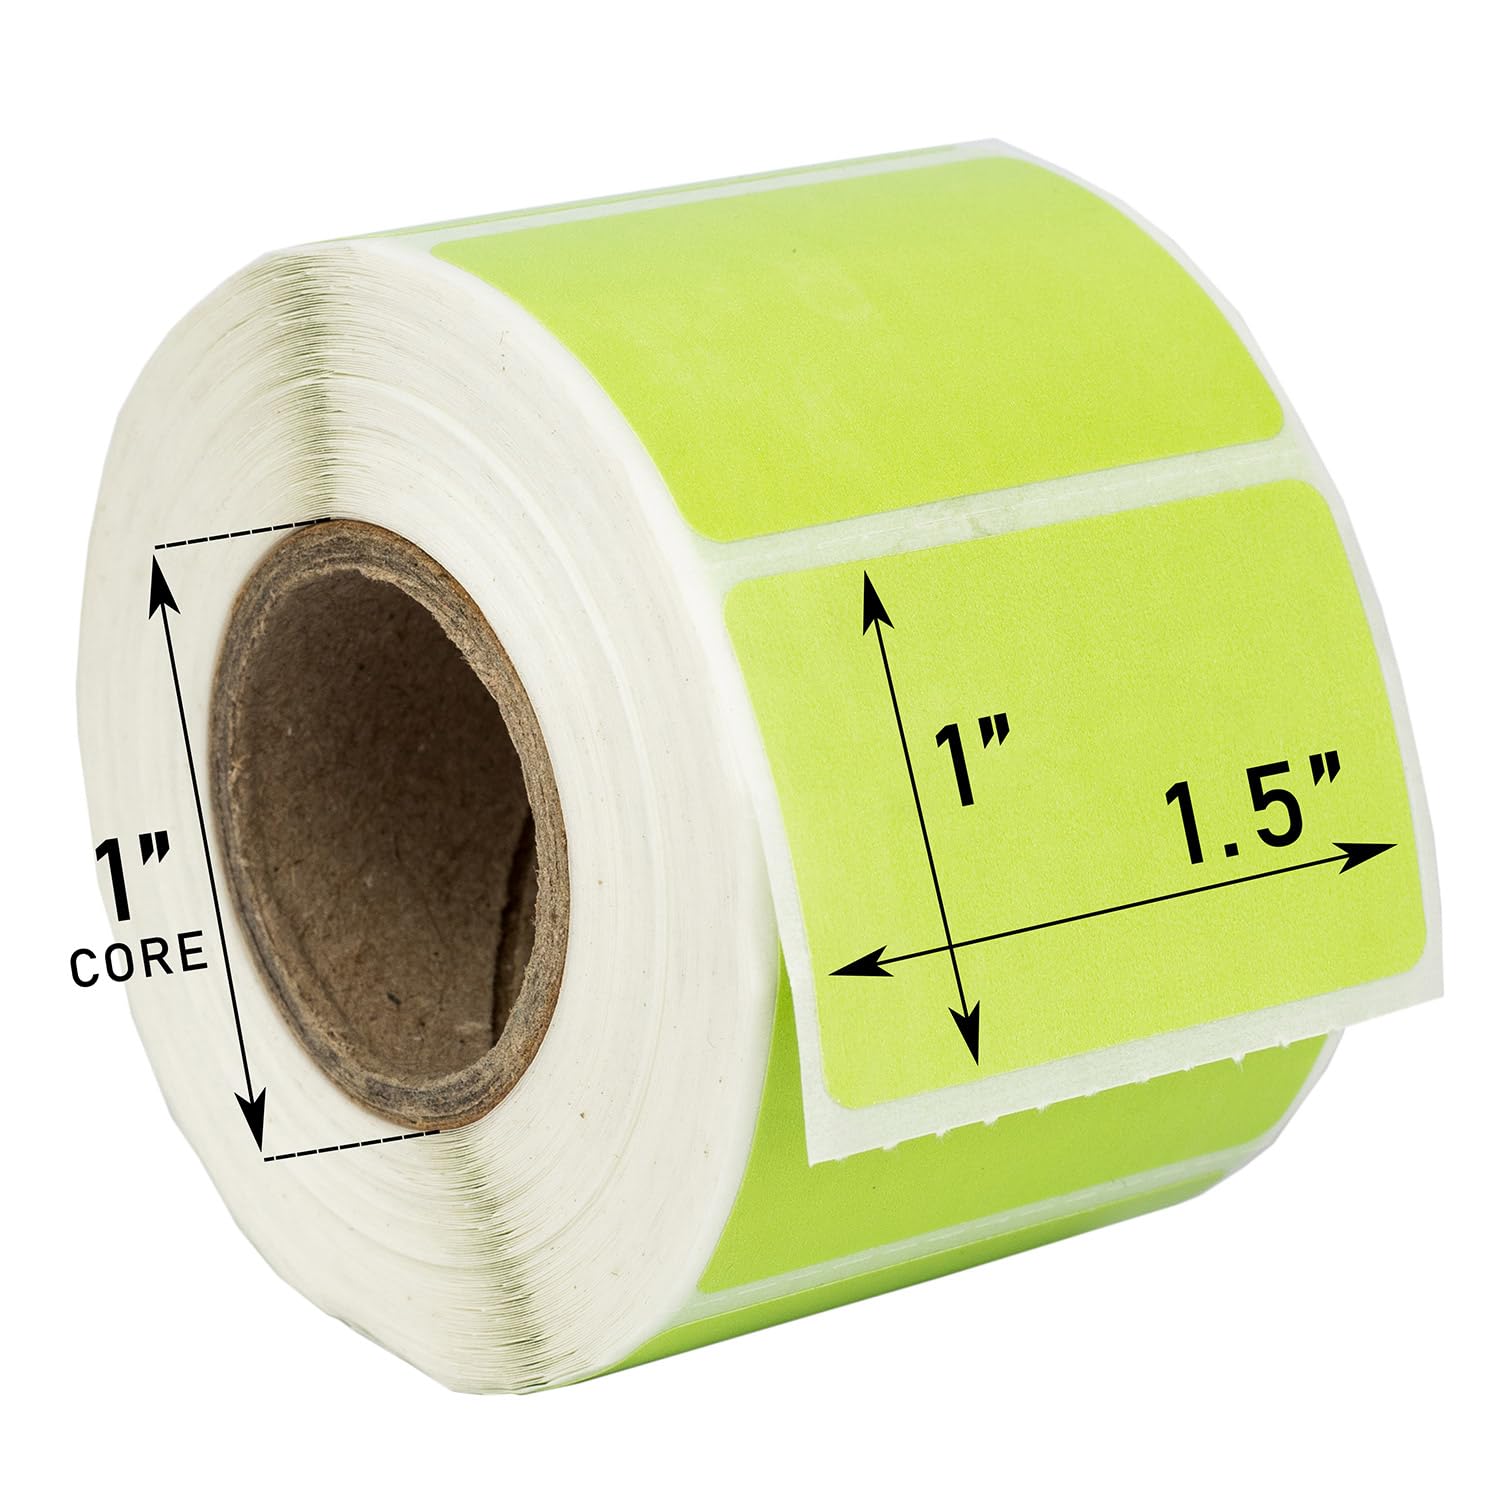 HOUSELABELS 1.5" x 1" Green Multipurpose Labels on 1" Core Compatible with Zebra and Rollo Printers, 1 Roll / 520 Labels per Roll